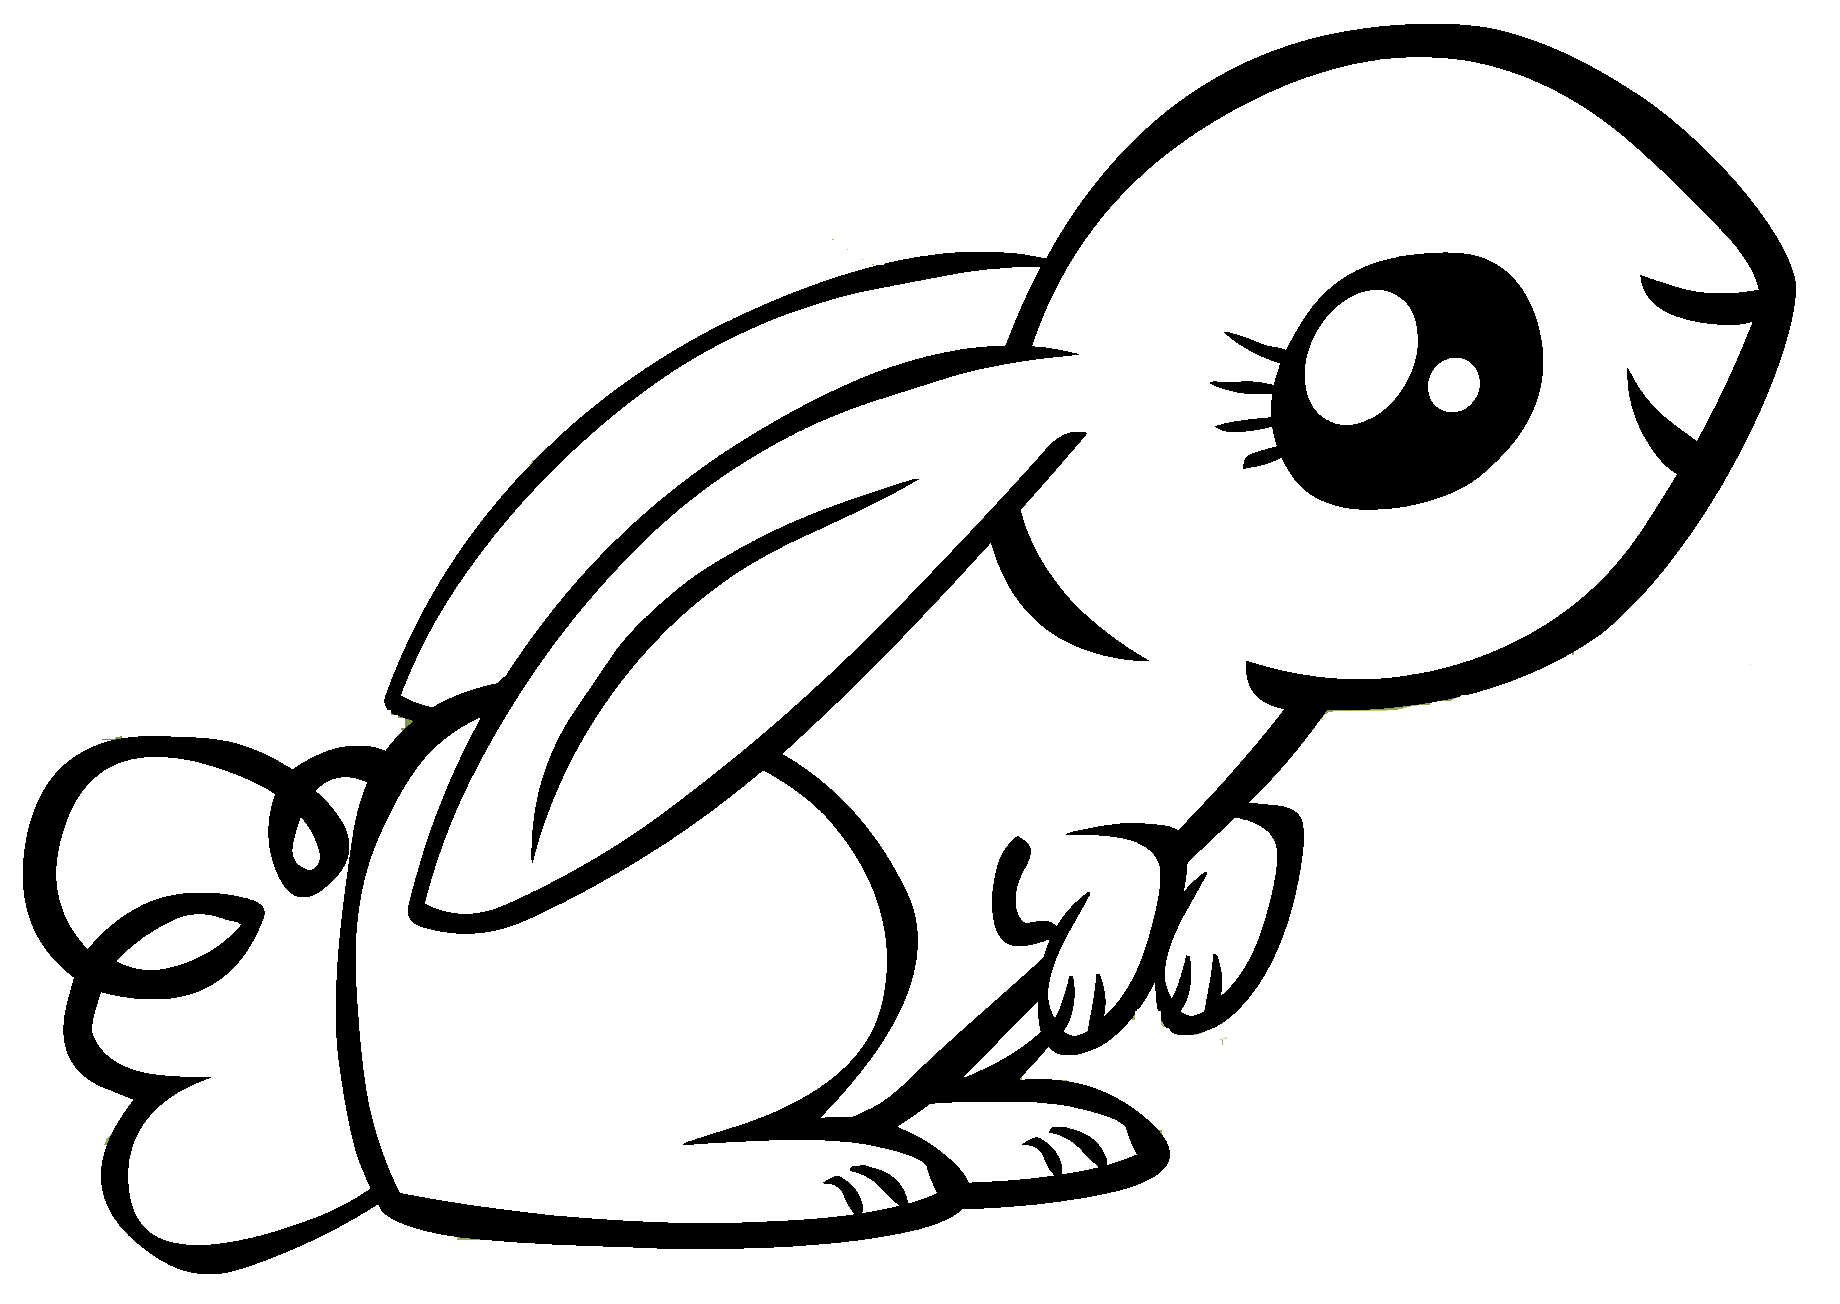 Bunny | Free Images at Clker.com - vector clip art online, royalty free